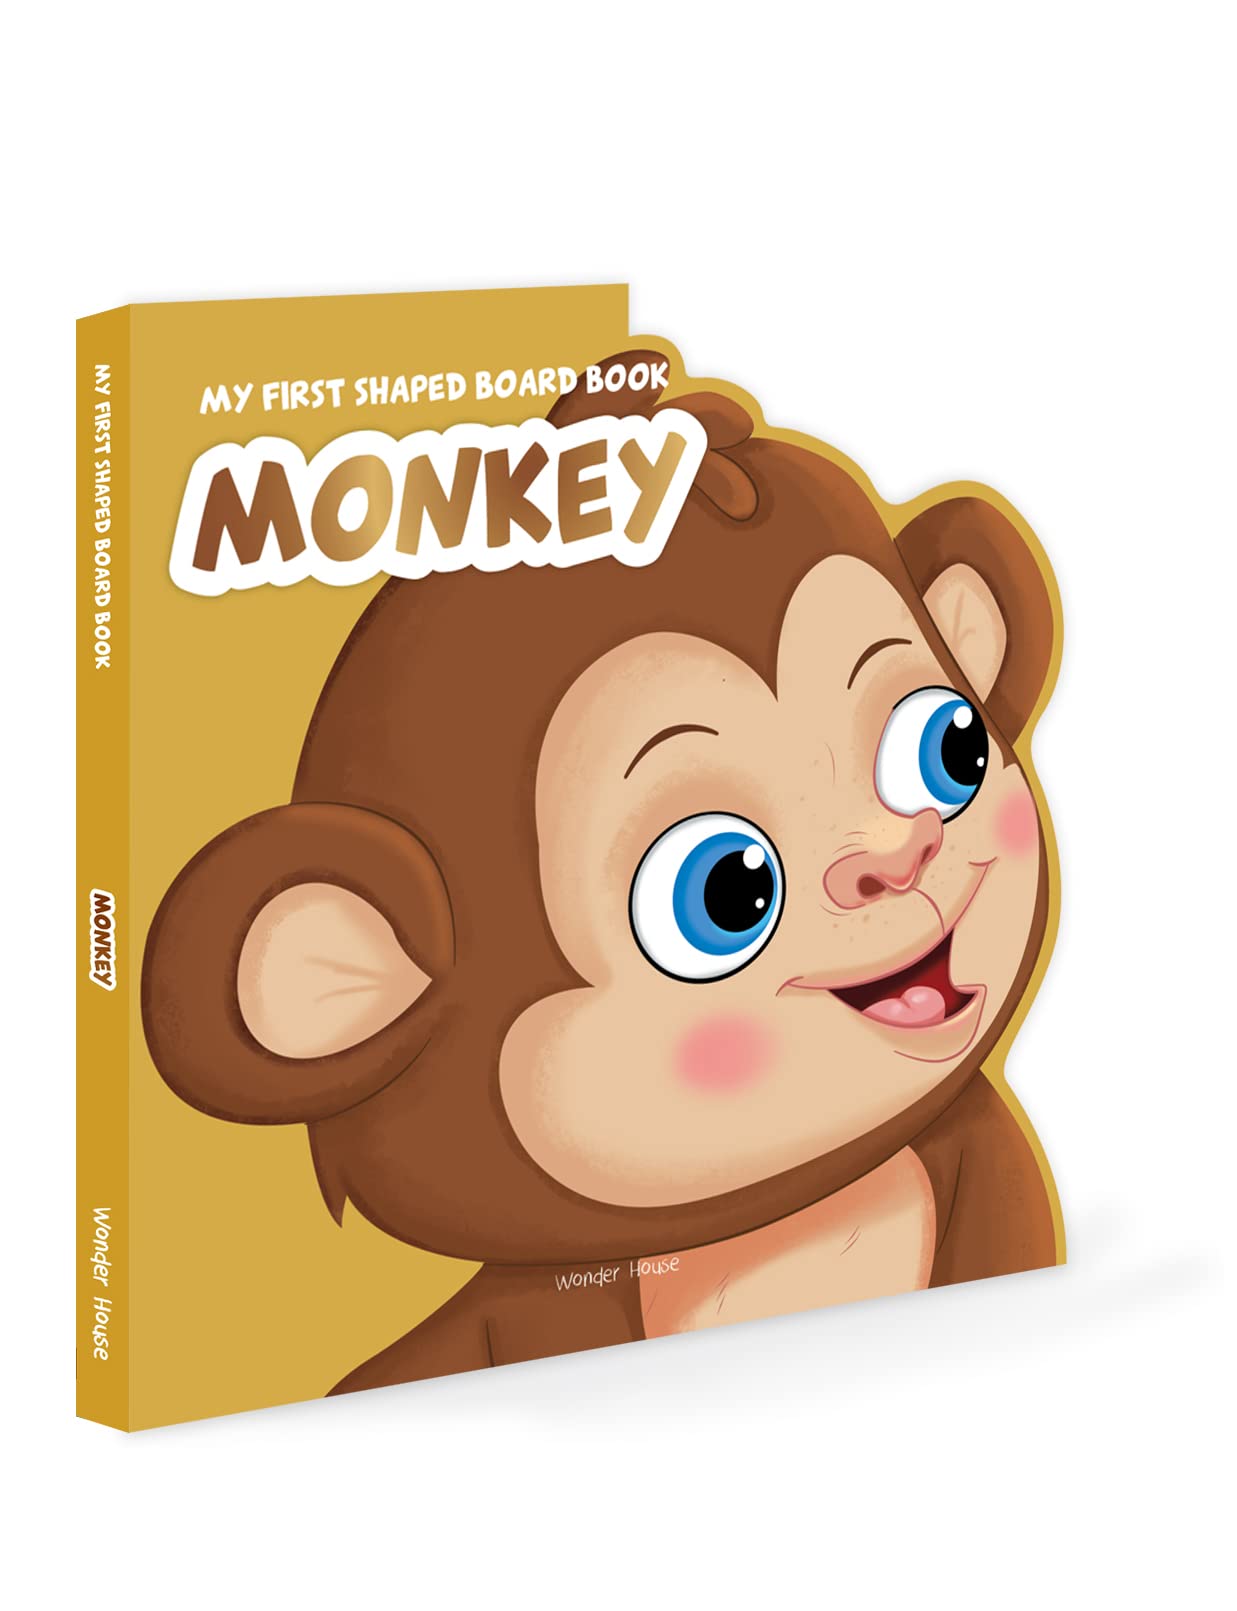 My First Shaped Board book - Monkey